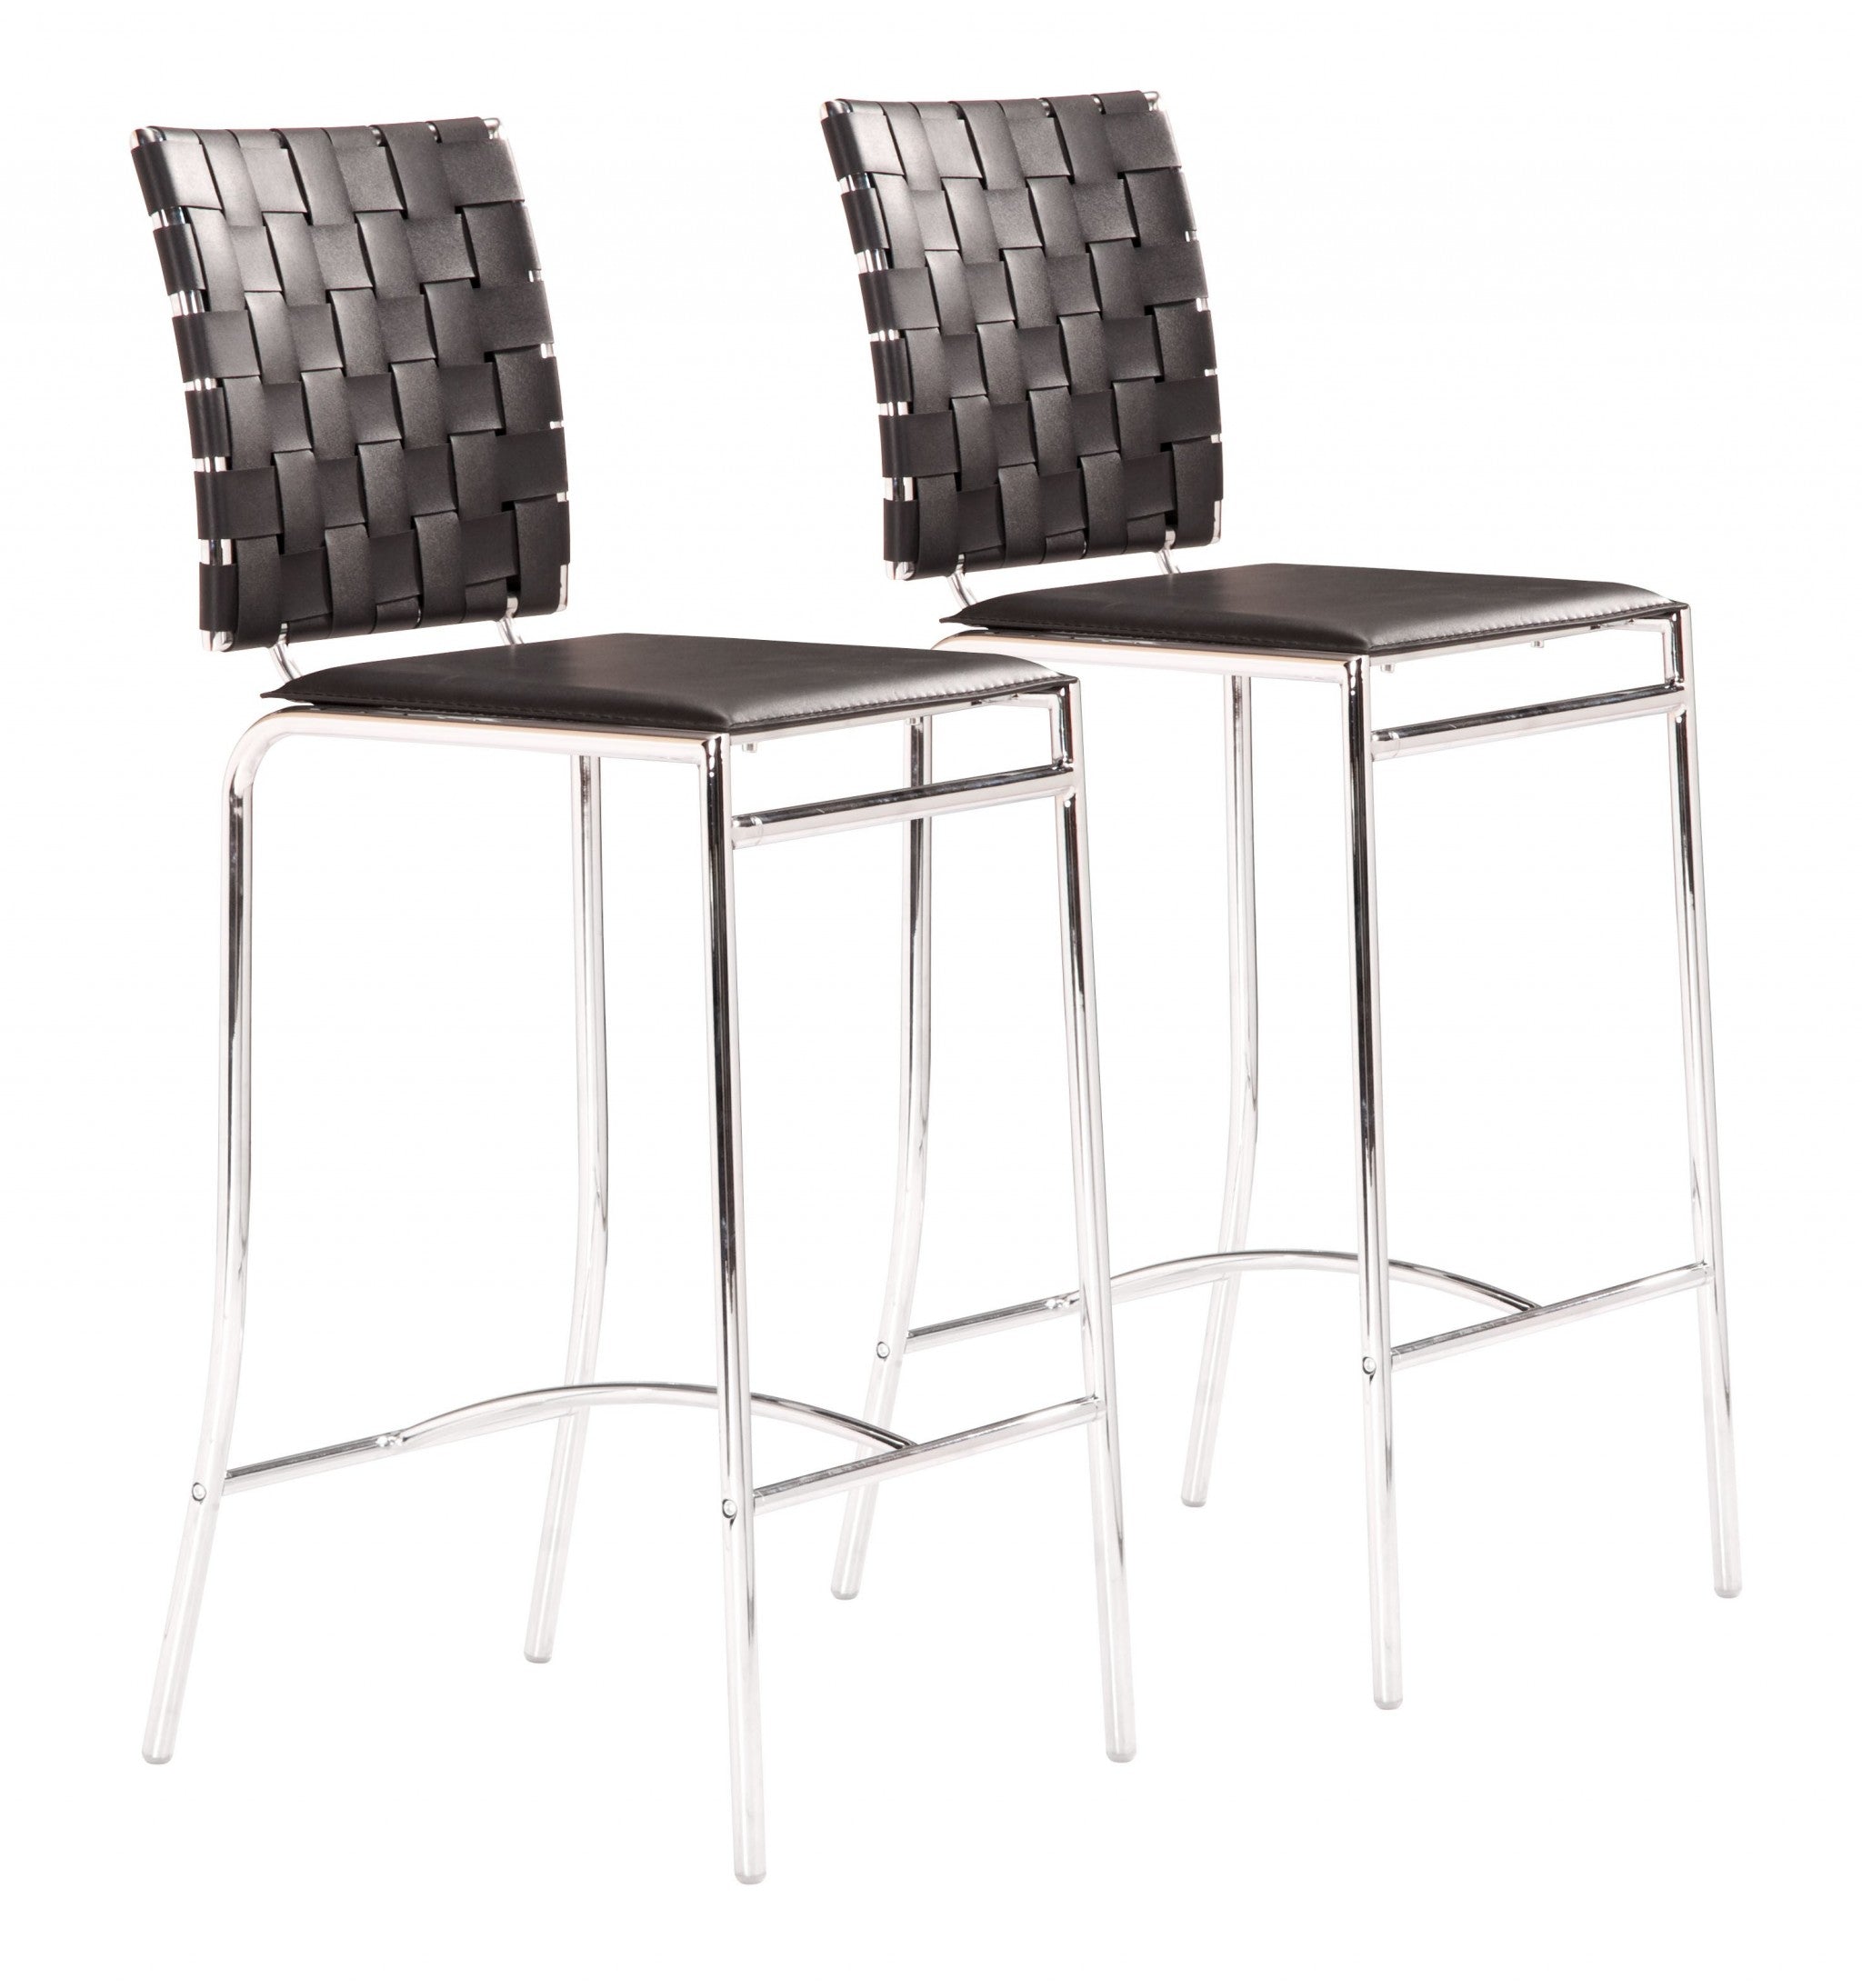 Set of Two 26" Black And Silver Steel Low Back Counter Height Bar Chairs